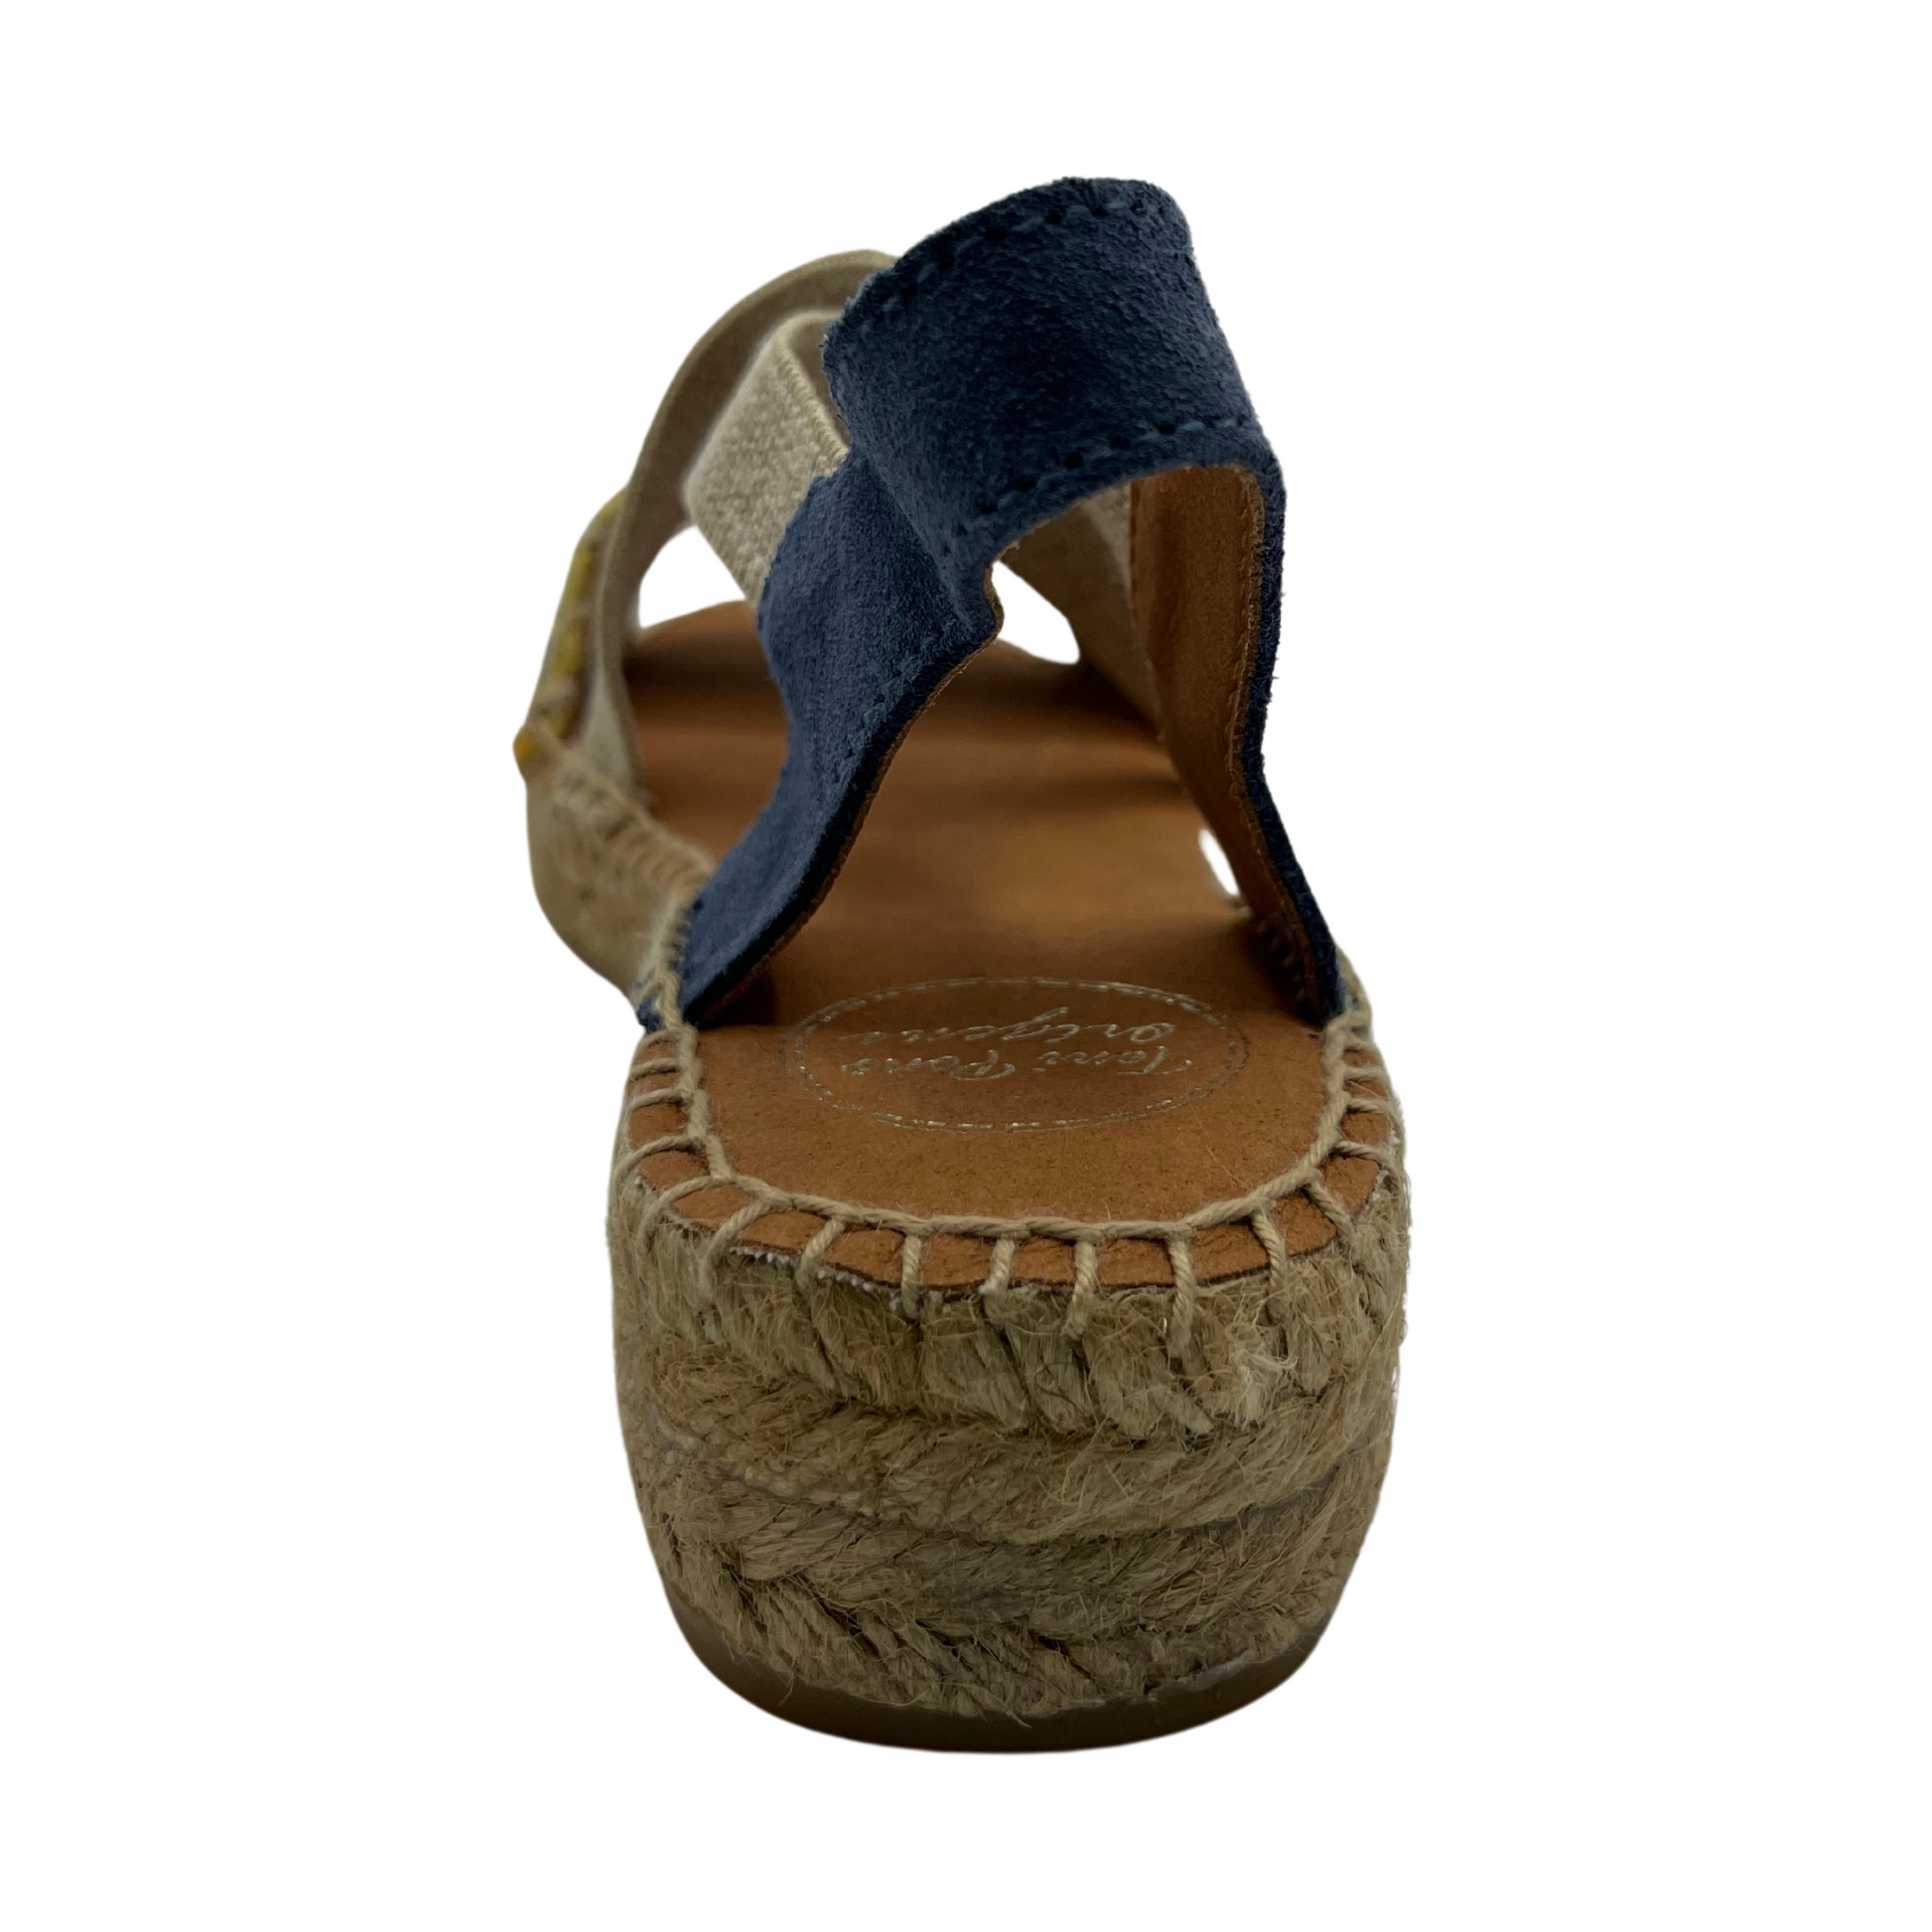 Back view of women's espadrille with non-slip rubber bottom and hand stitched details.